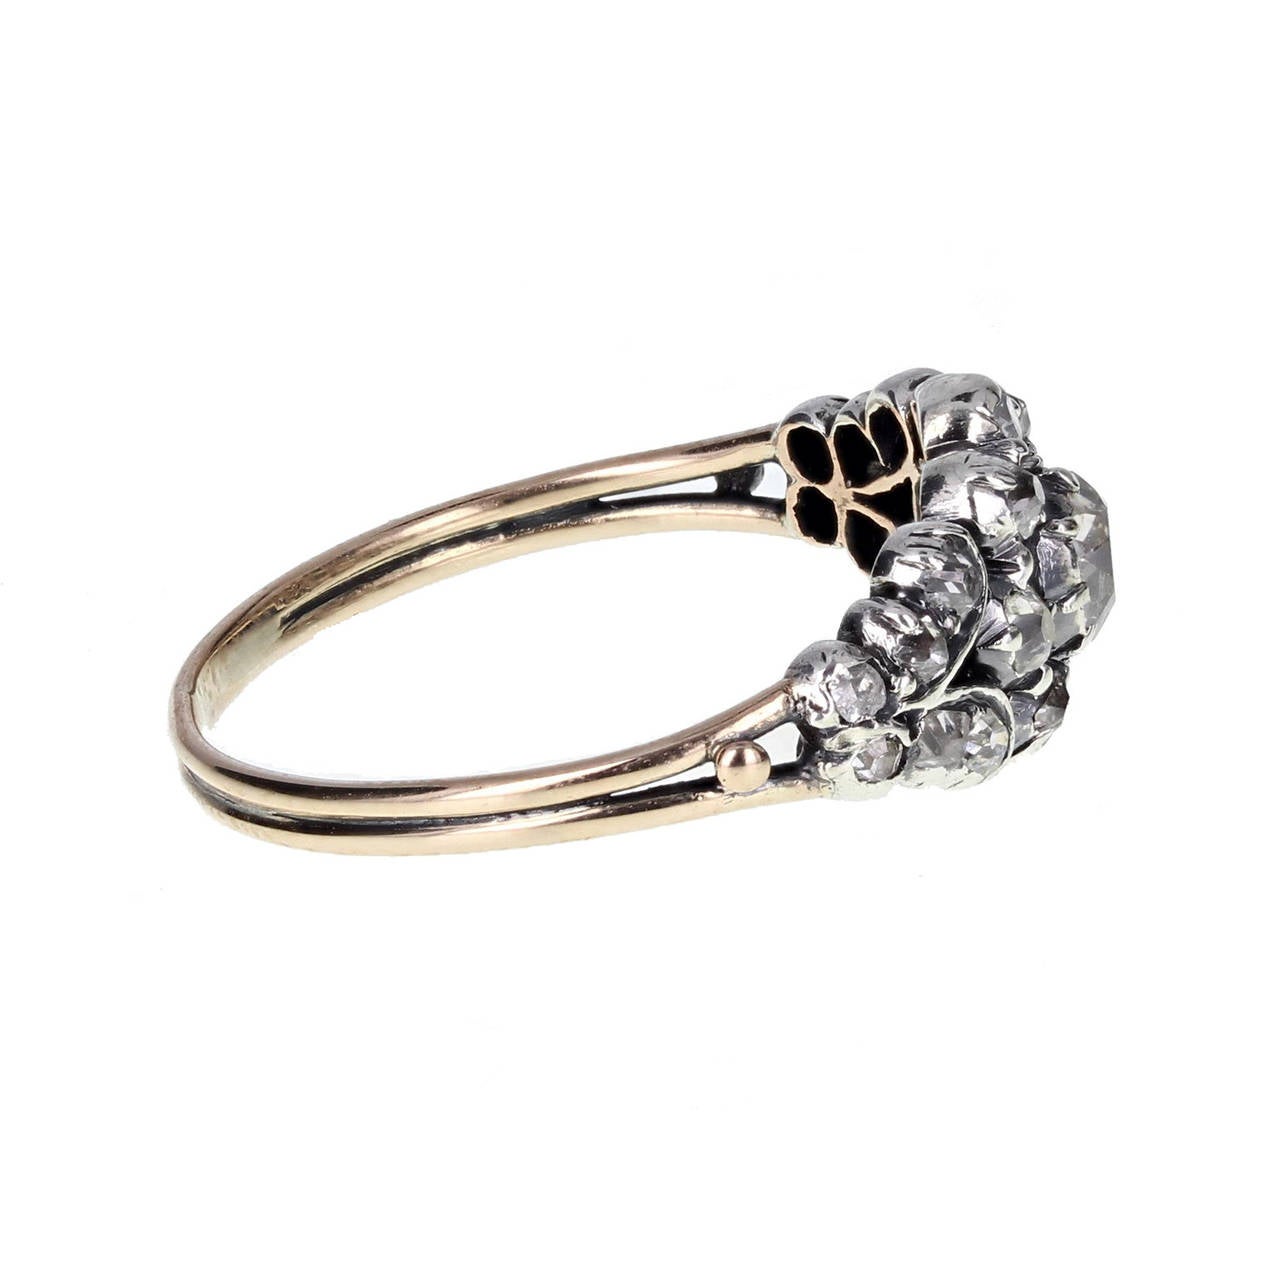 This exquisite Georgian ring is typical in period style and of fantastic quality. Old mine-cut diamonds are set in a pierced silver setting, with a larger central diamond, haloed with smaller diamonds and flanked on each side by scroll work. Fine 18